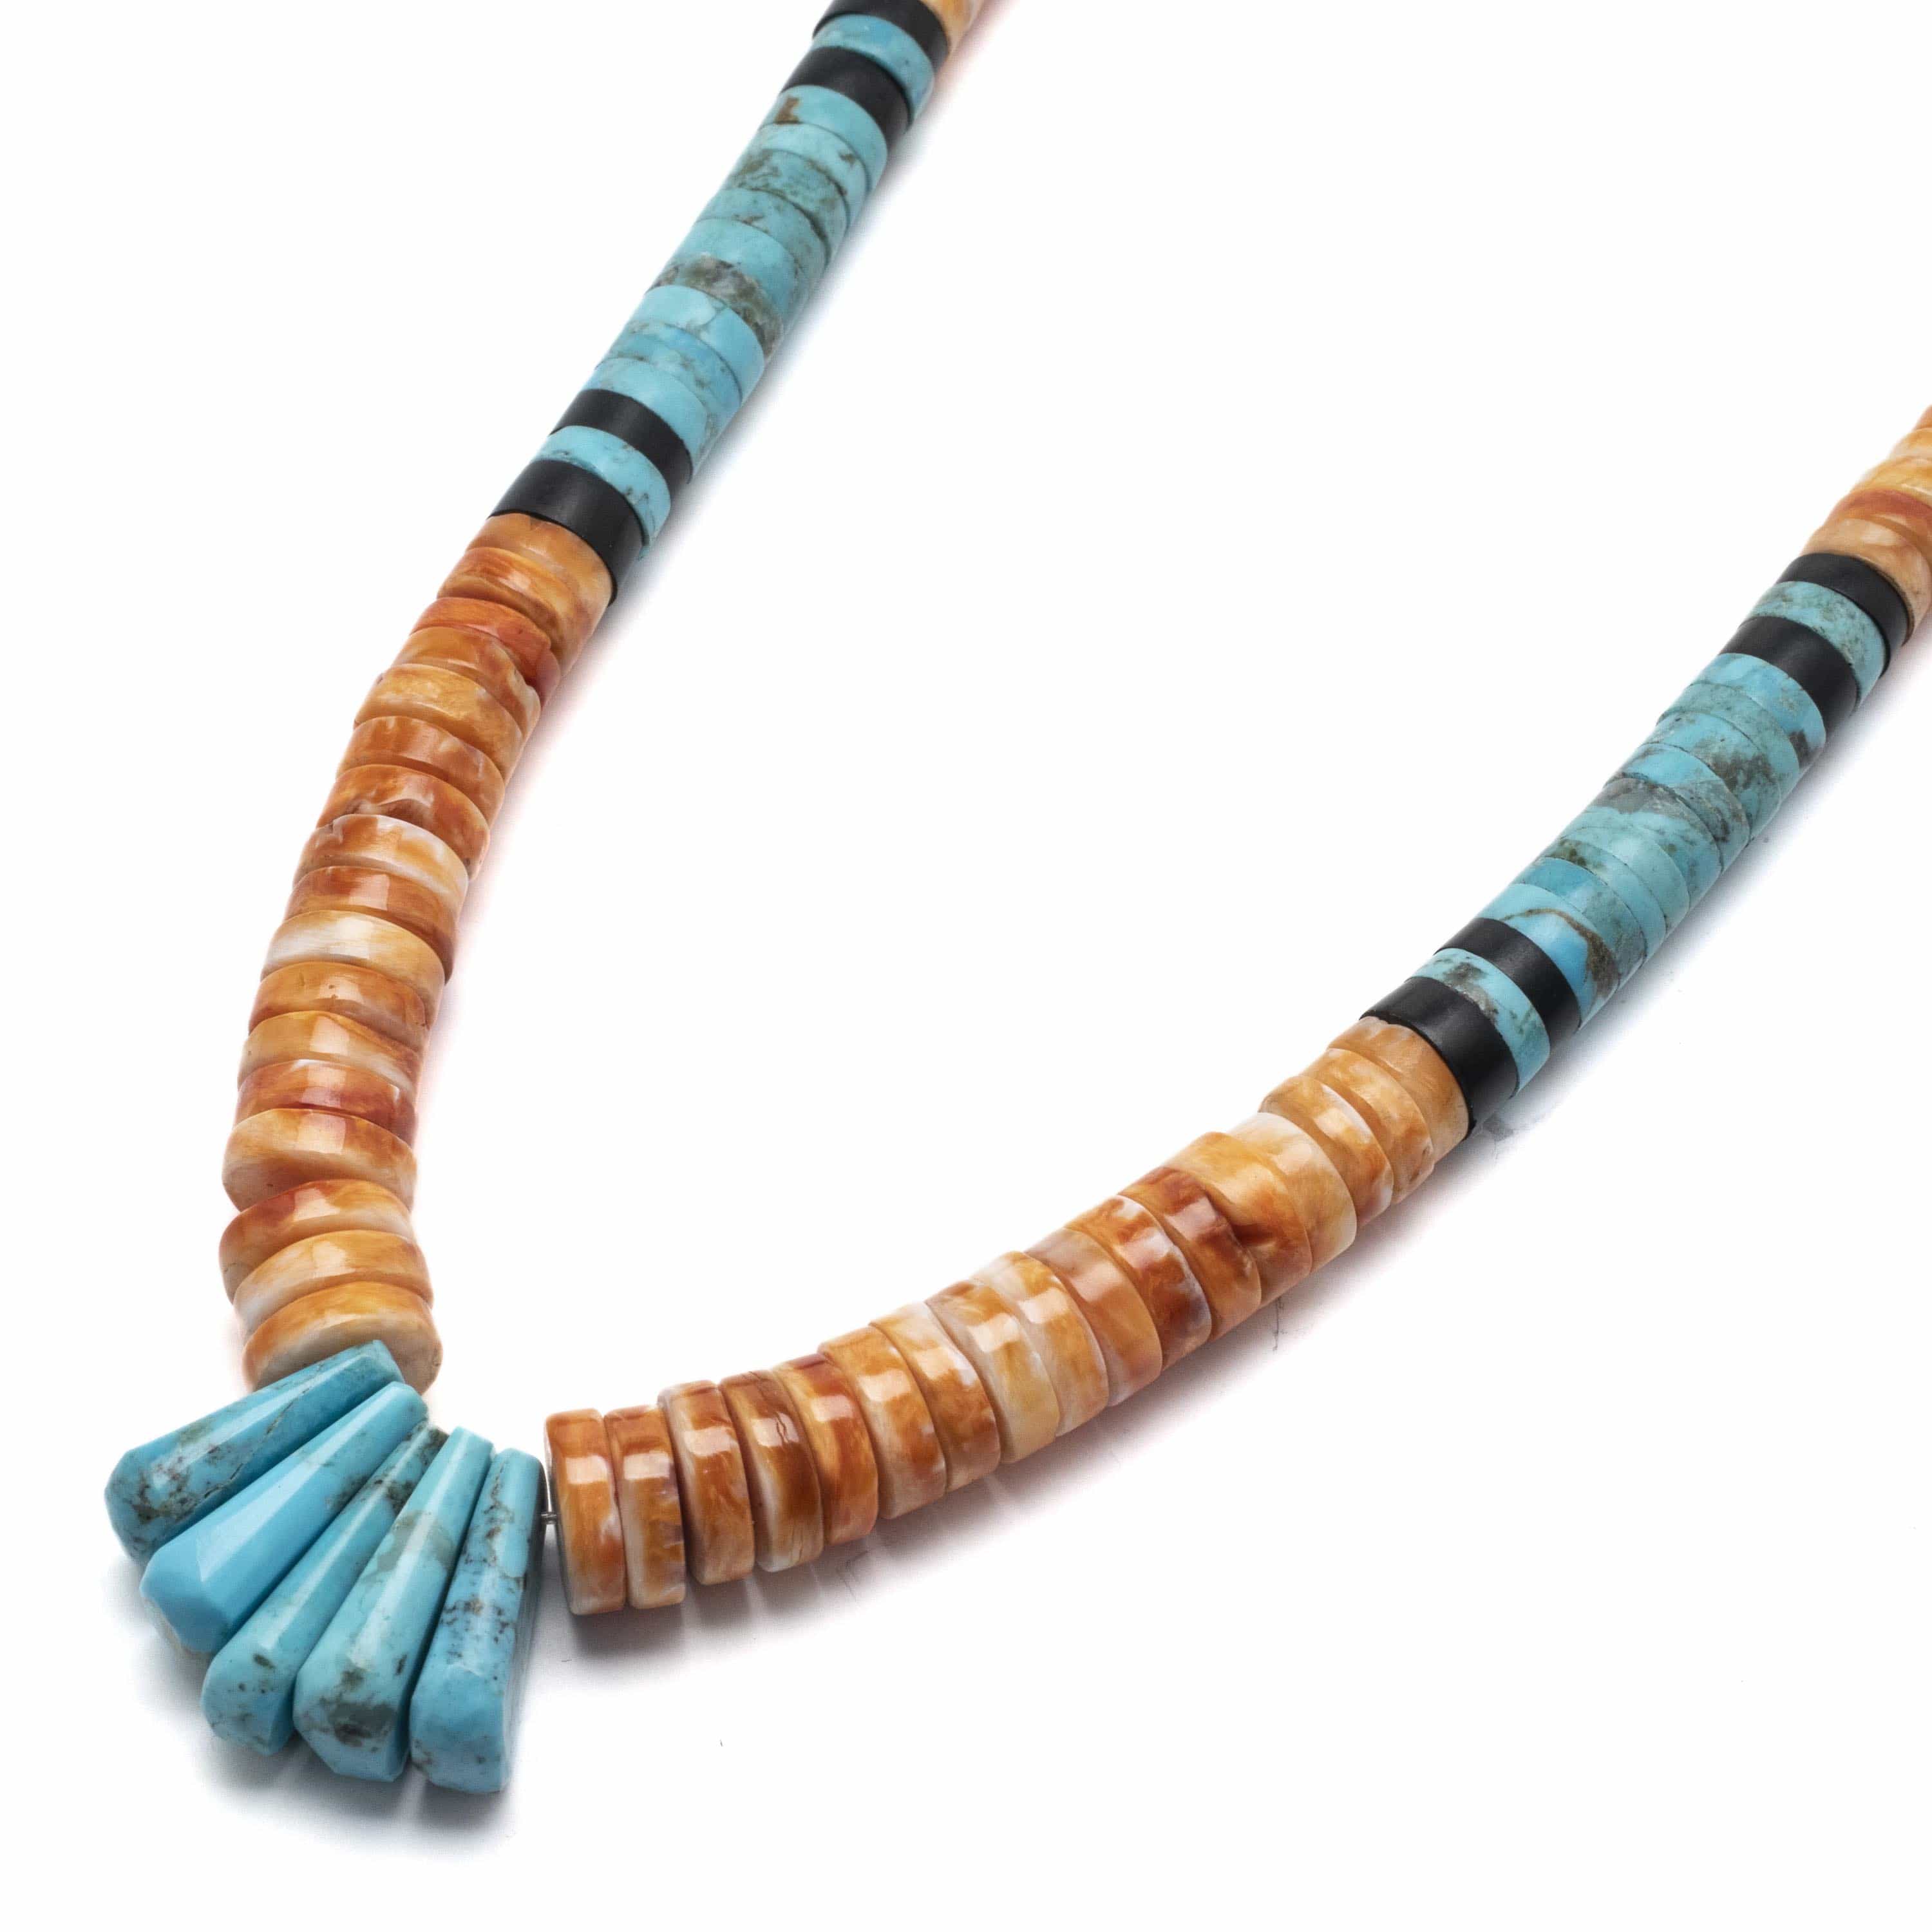 Kalifano Native American Jewelry Spiny Oyster Shell Disc Necklace with Kingman Turquoise USA Native American Made 925 Sterling Silver Necklace NAN1800.013